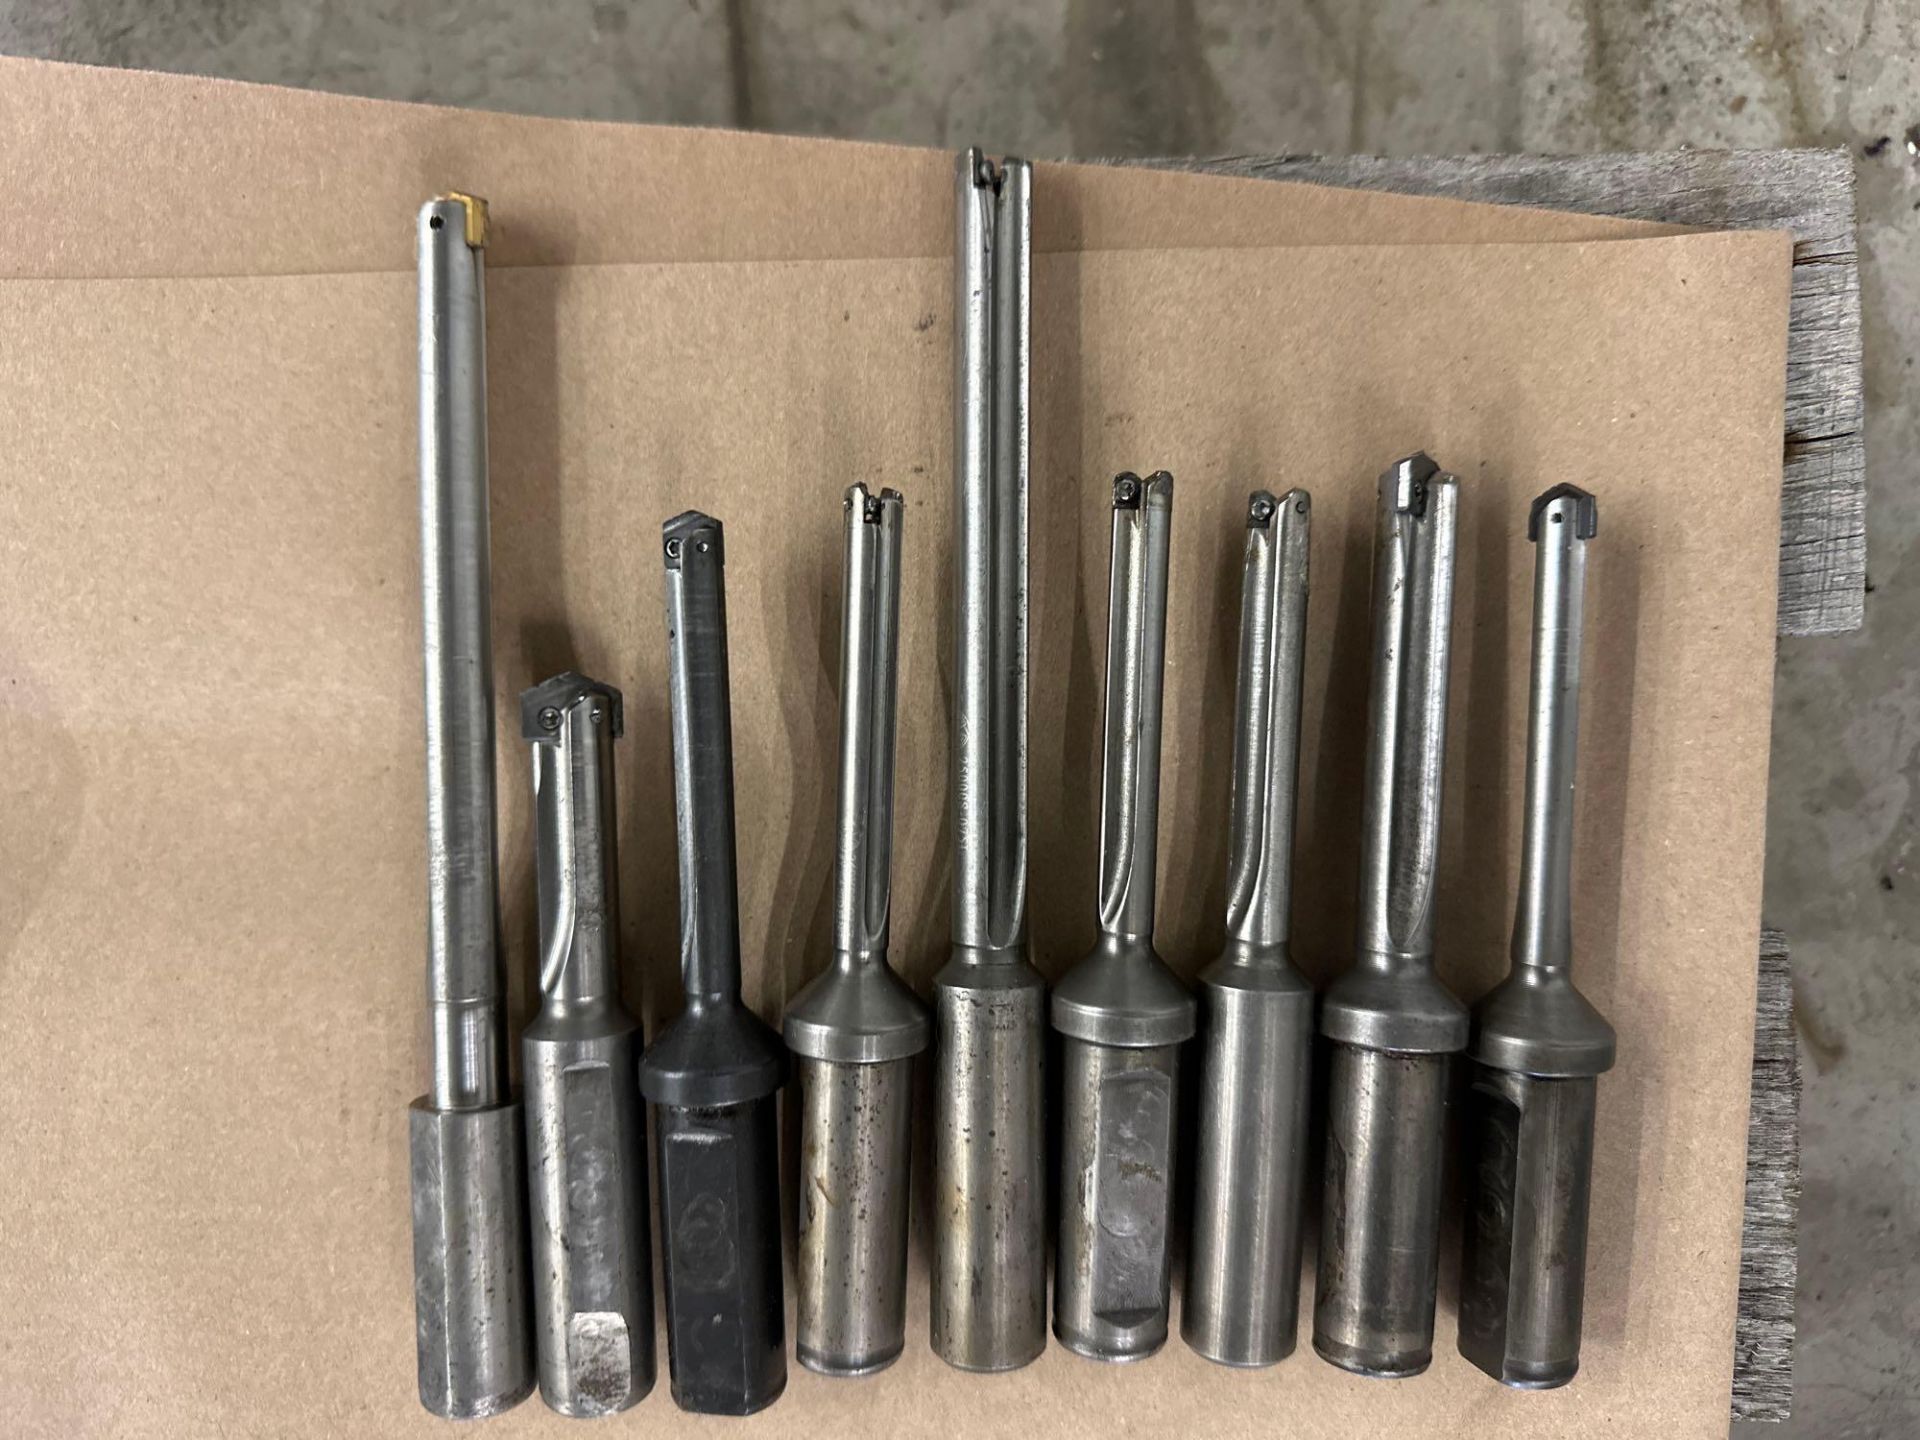 Lot of 9 Assorted Spade Insert Boring Bars Size Ranging From: 3/4” X 4 5/8” to 3/4” X 7 3/4” - Image 2 of 6